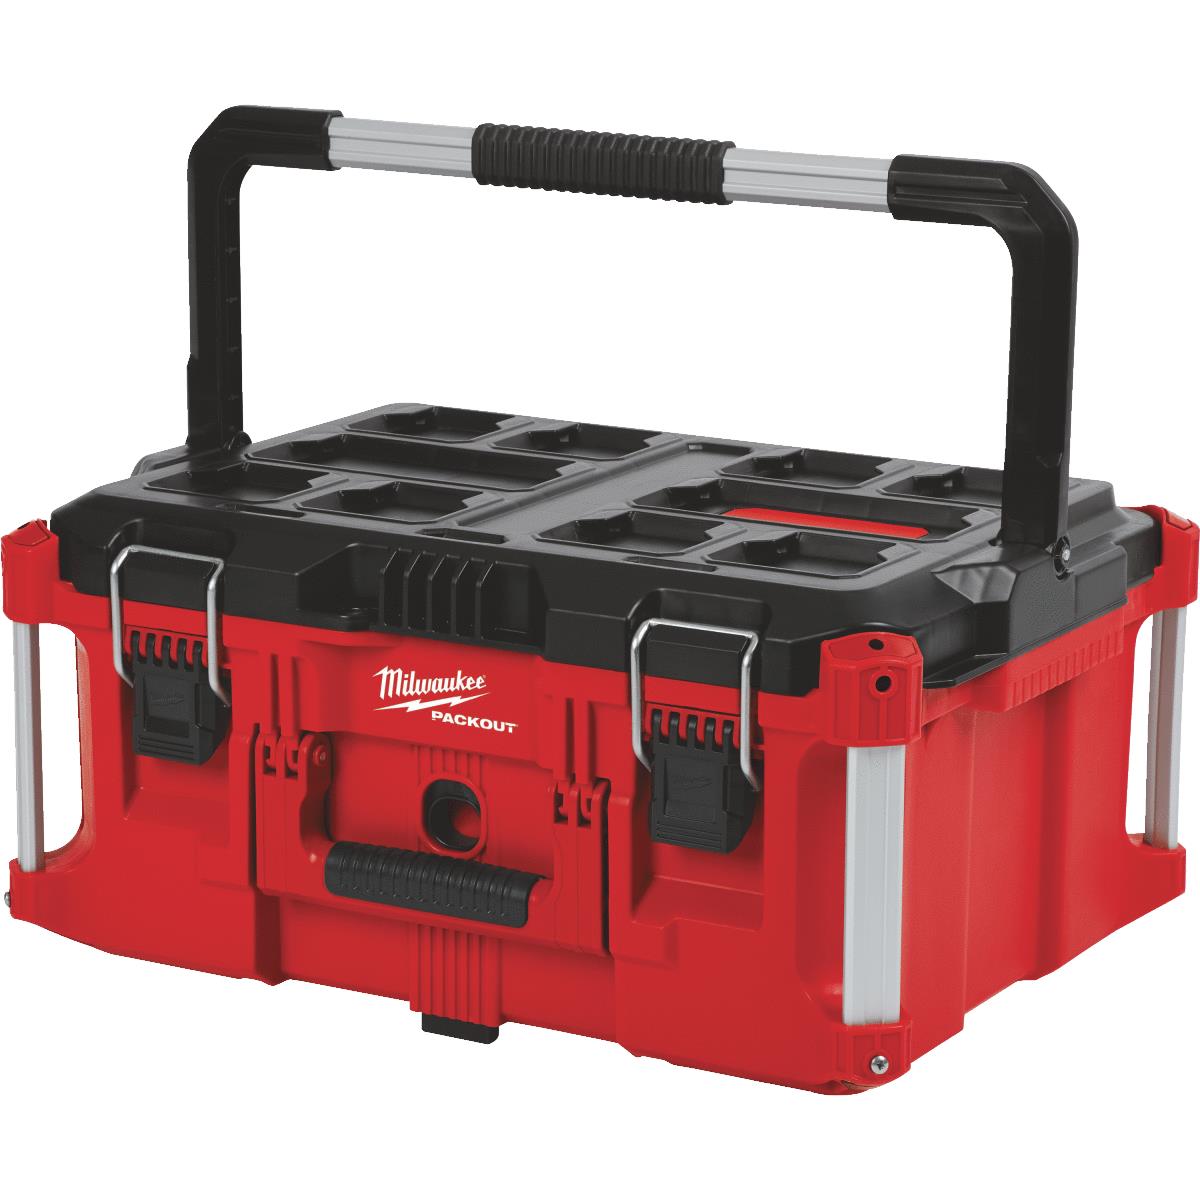 Buy Milwaukee PACKOUT Toolbox 100 Lb., Red/Black